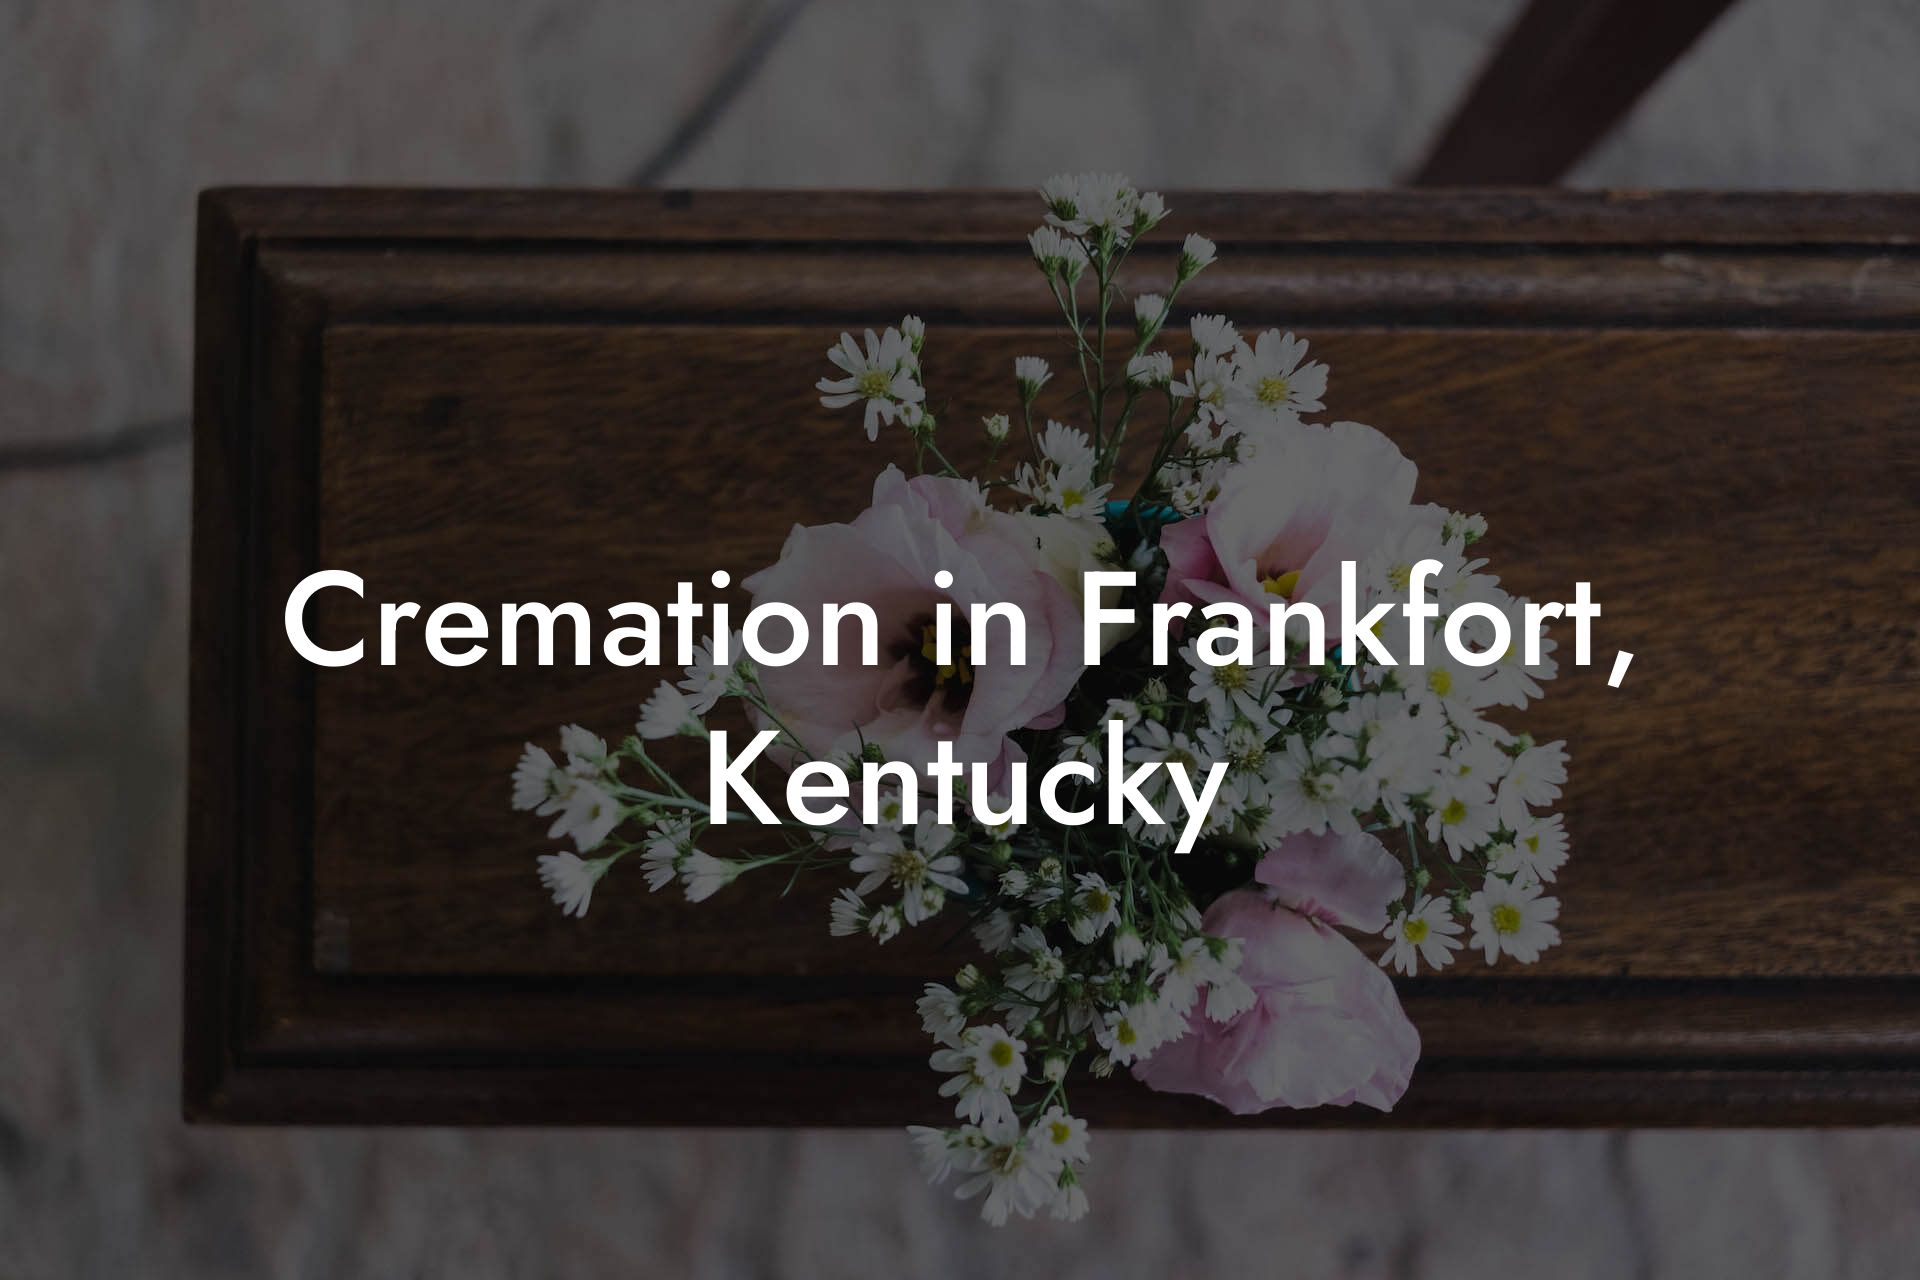 Cremation in Frankfort, Kentucky